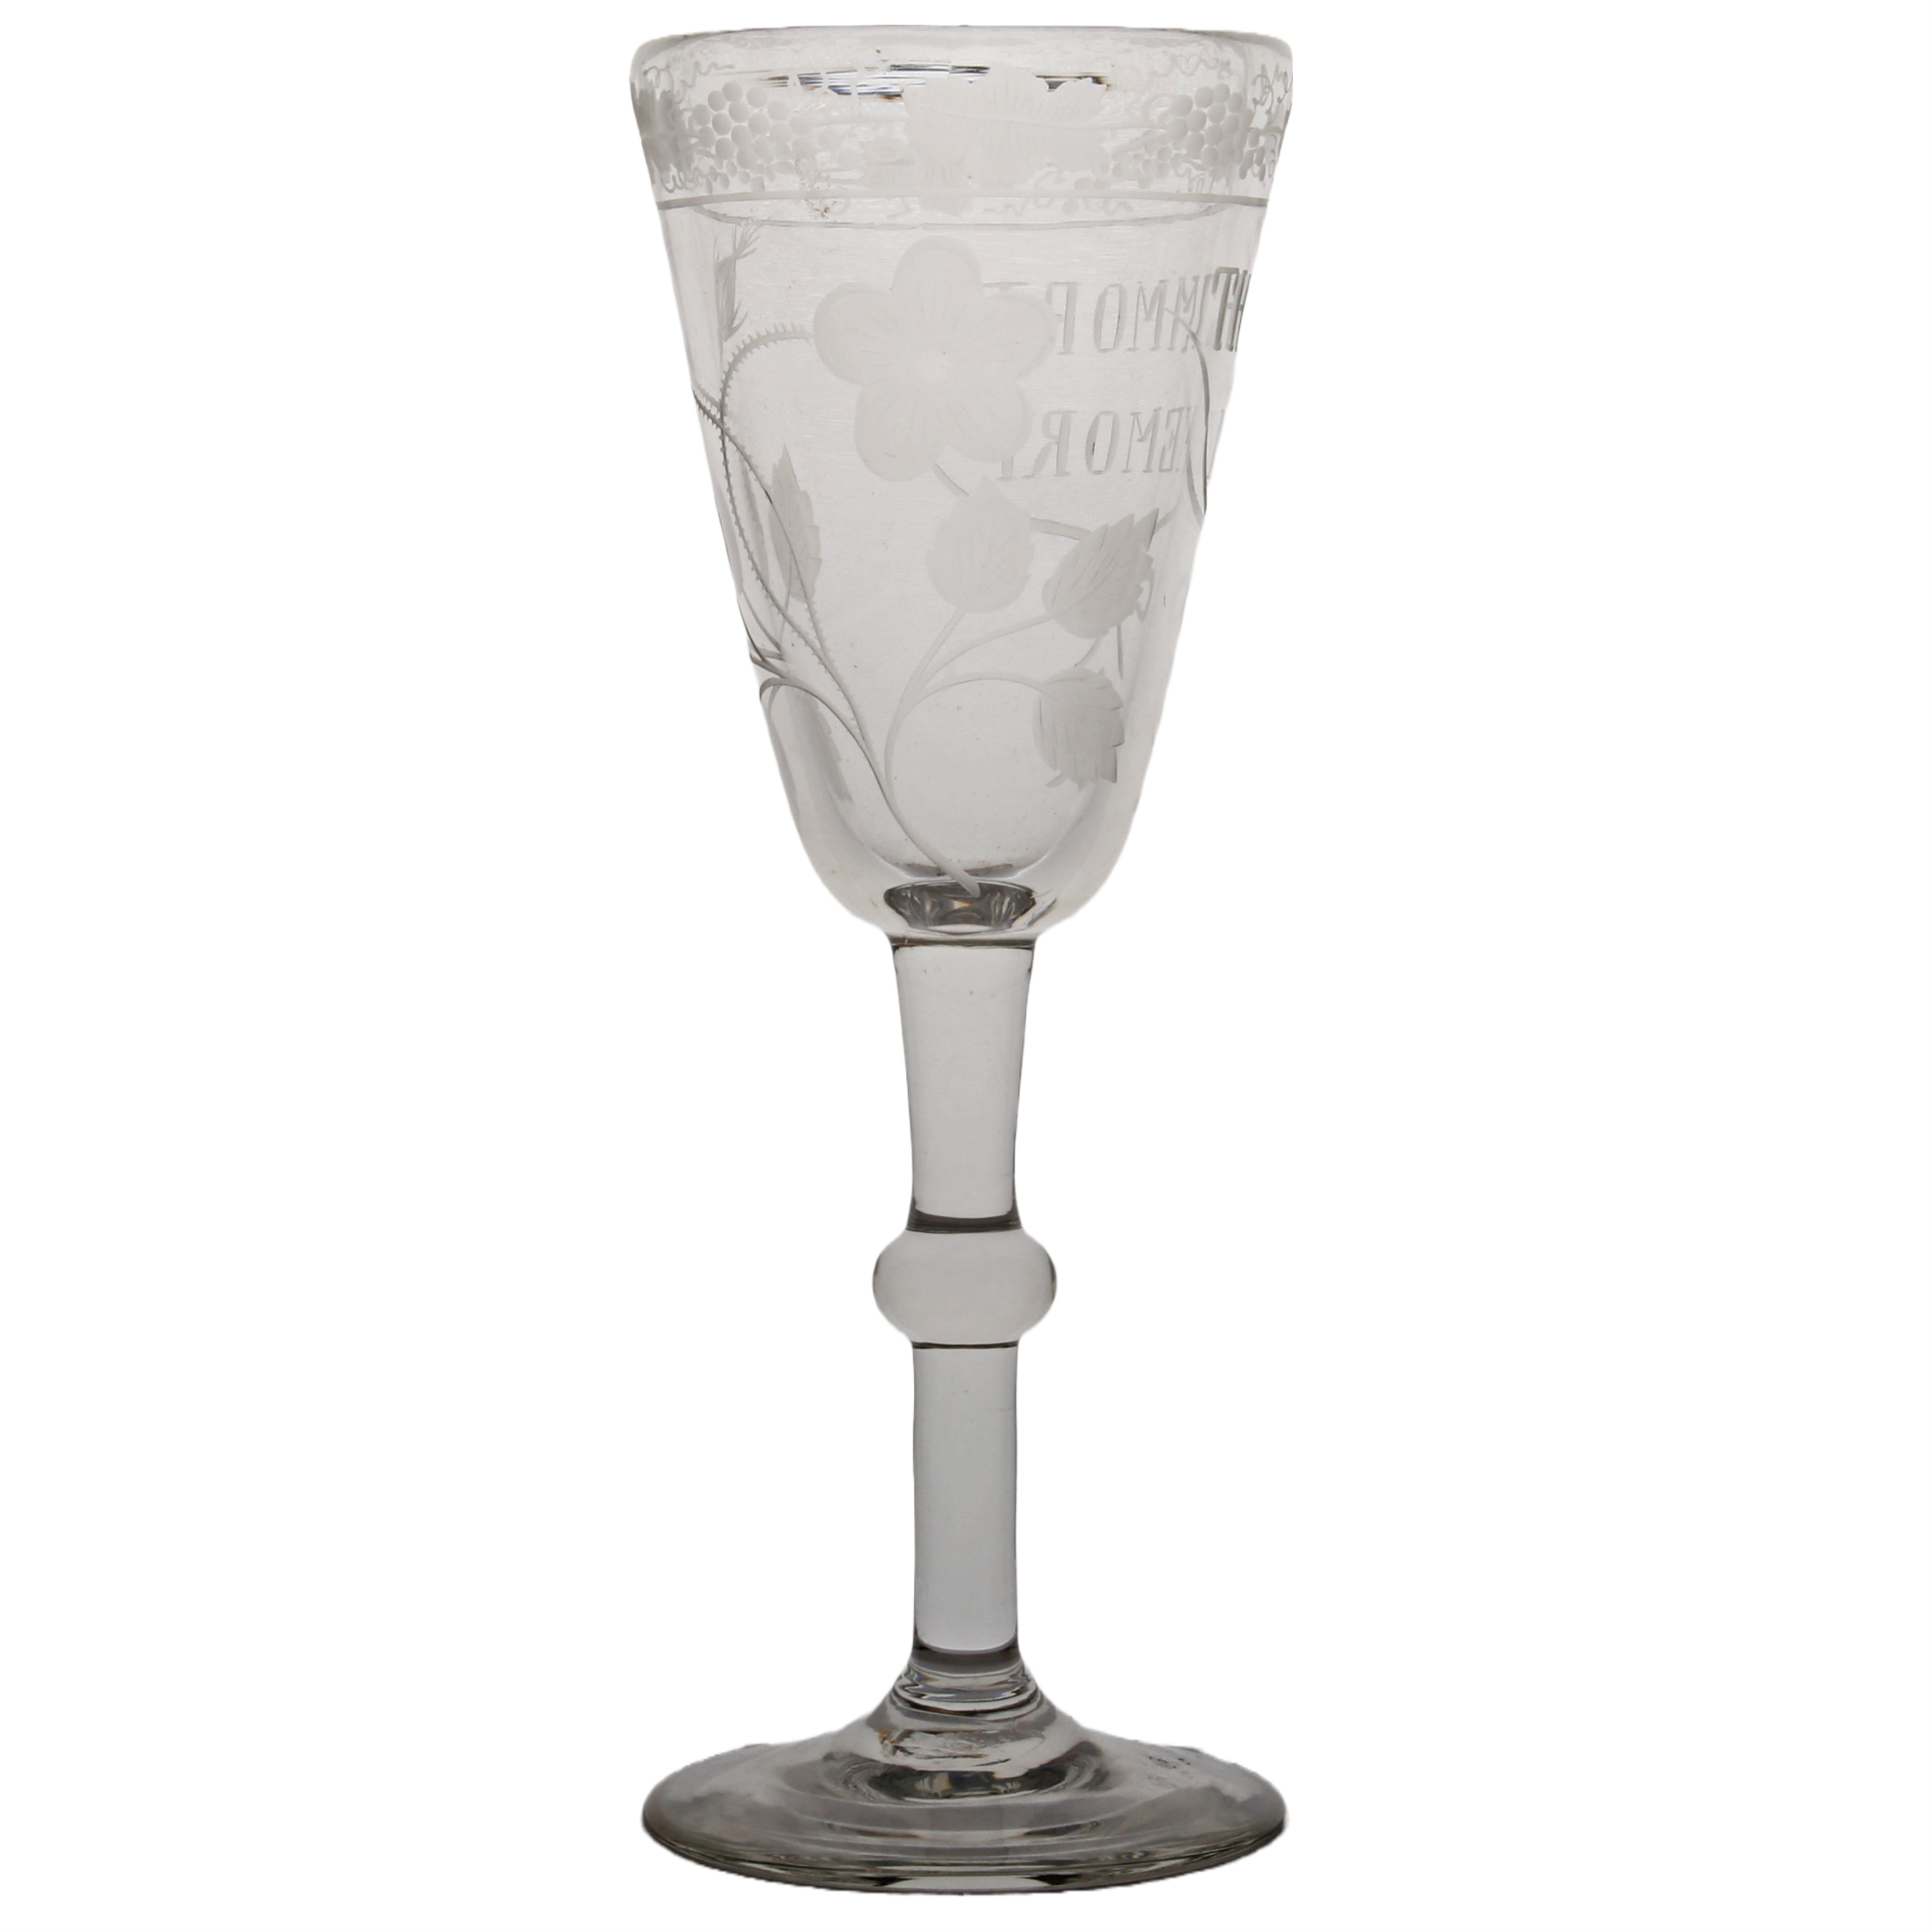 An early 19th Century glass, The Immortal Memory engraved to the bowl and trailing grape and vine